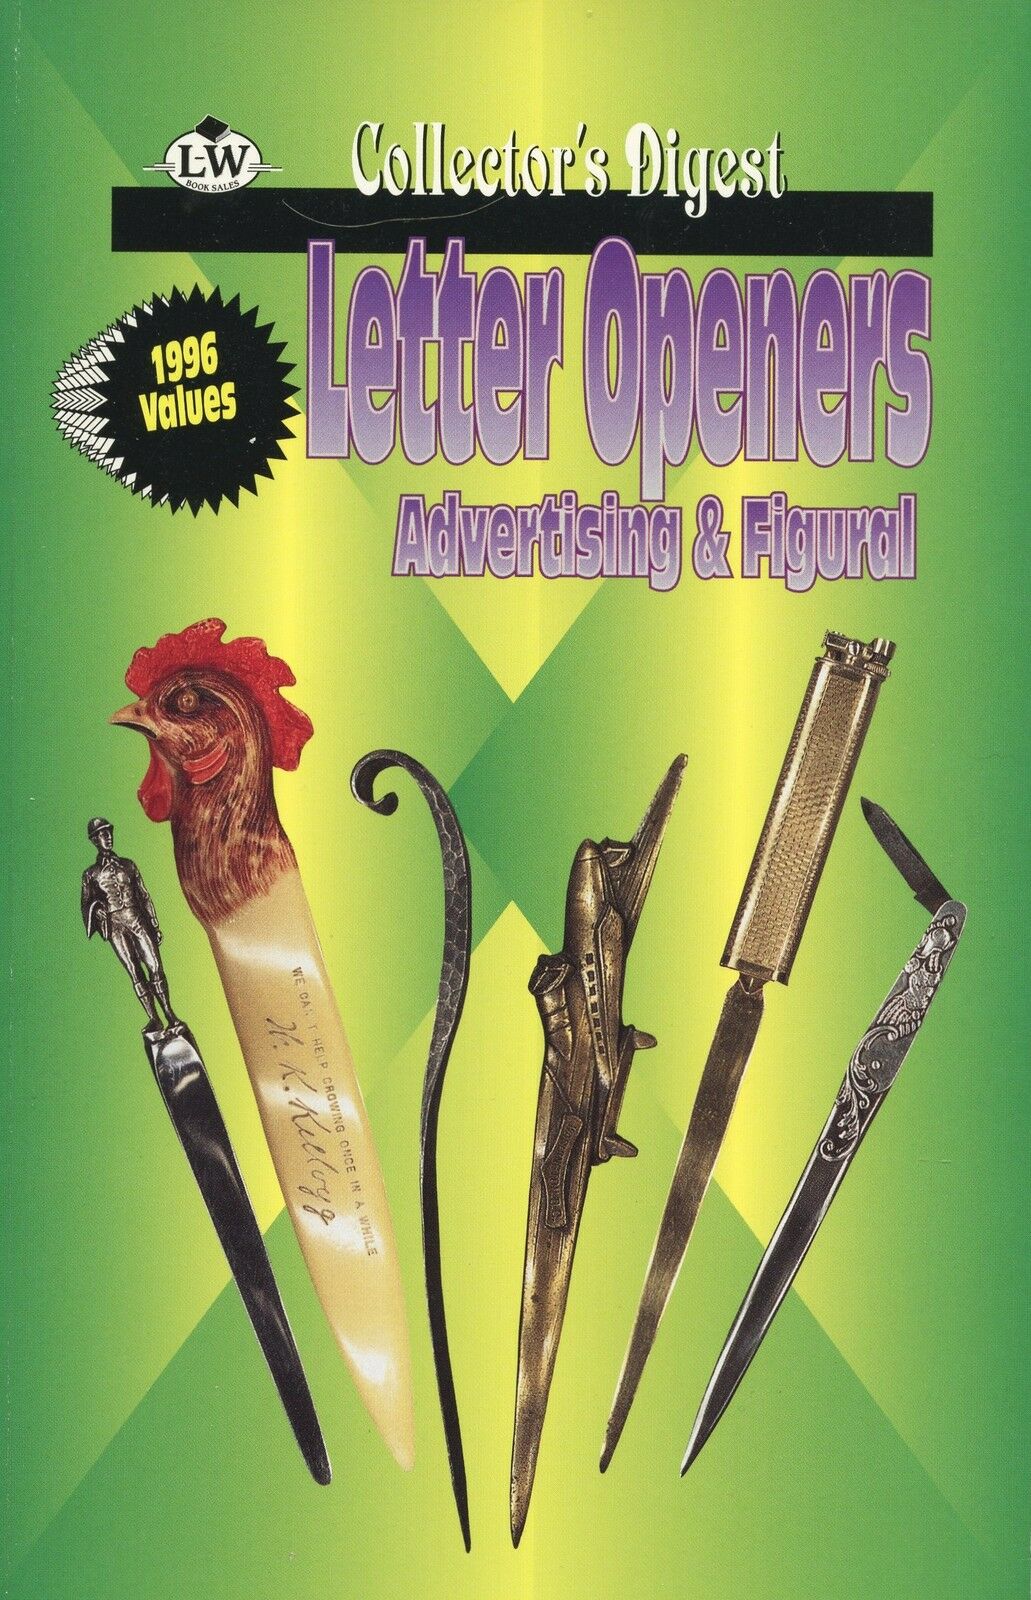 Collectible Letter Openers - Advertising Figural / Illustrated Book + Values